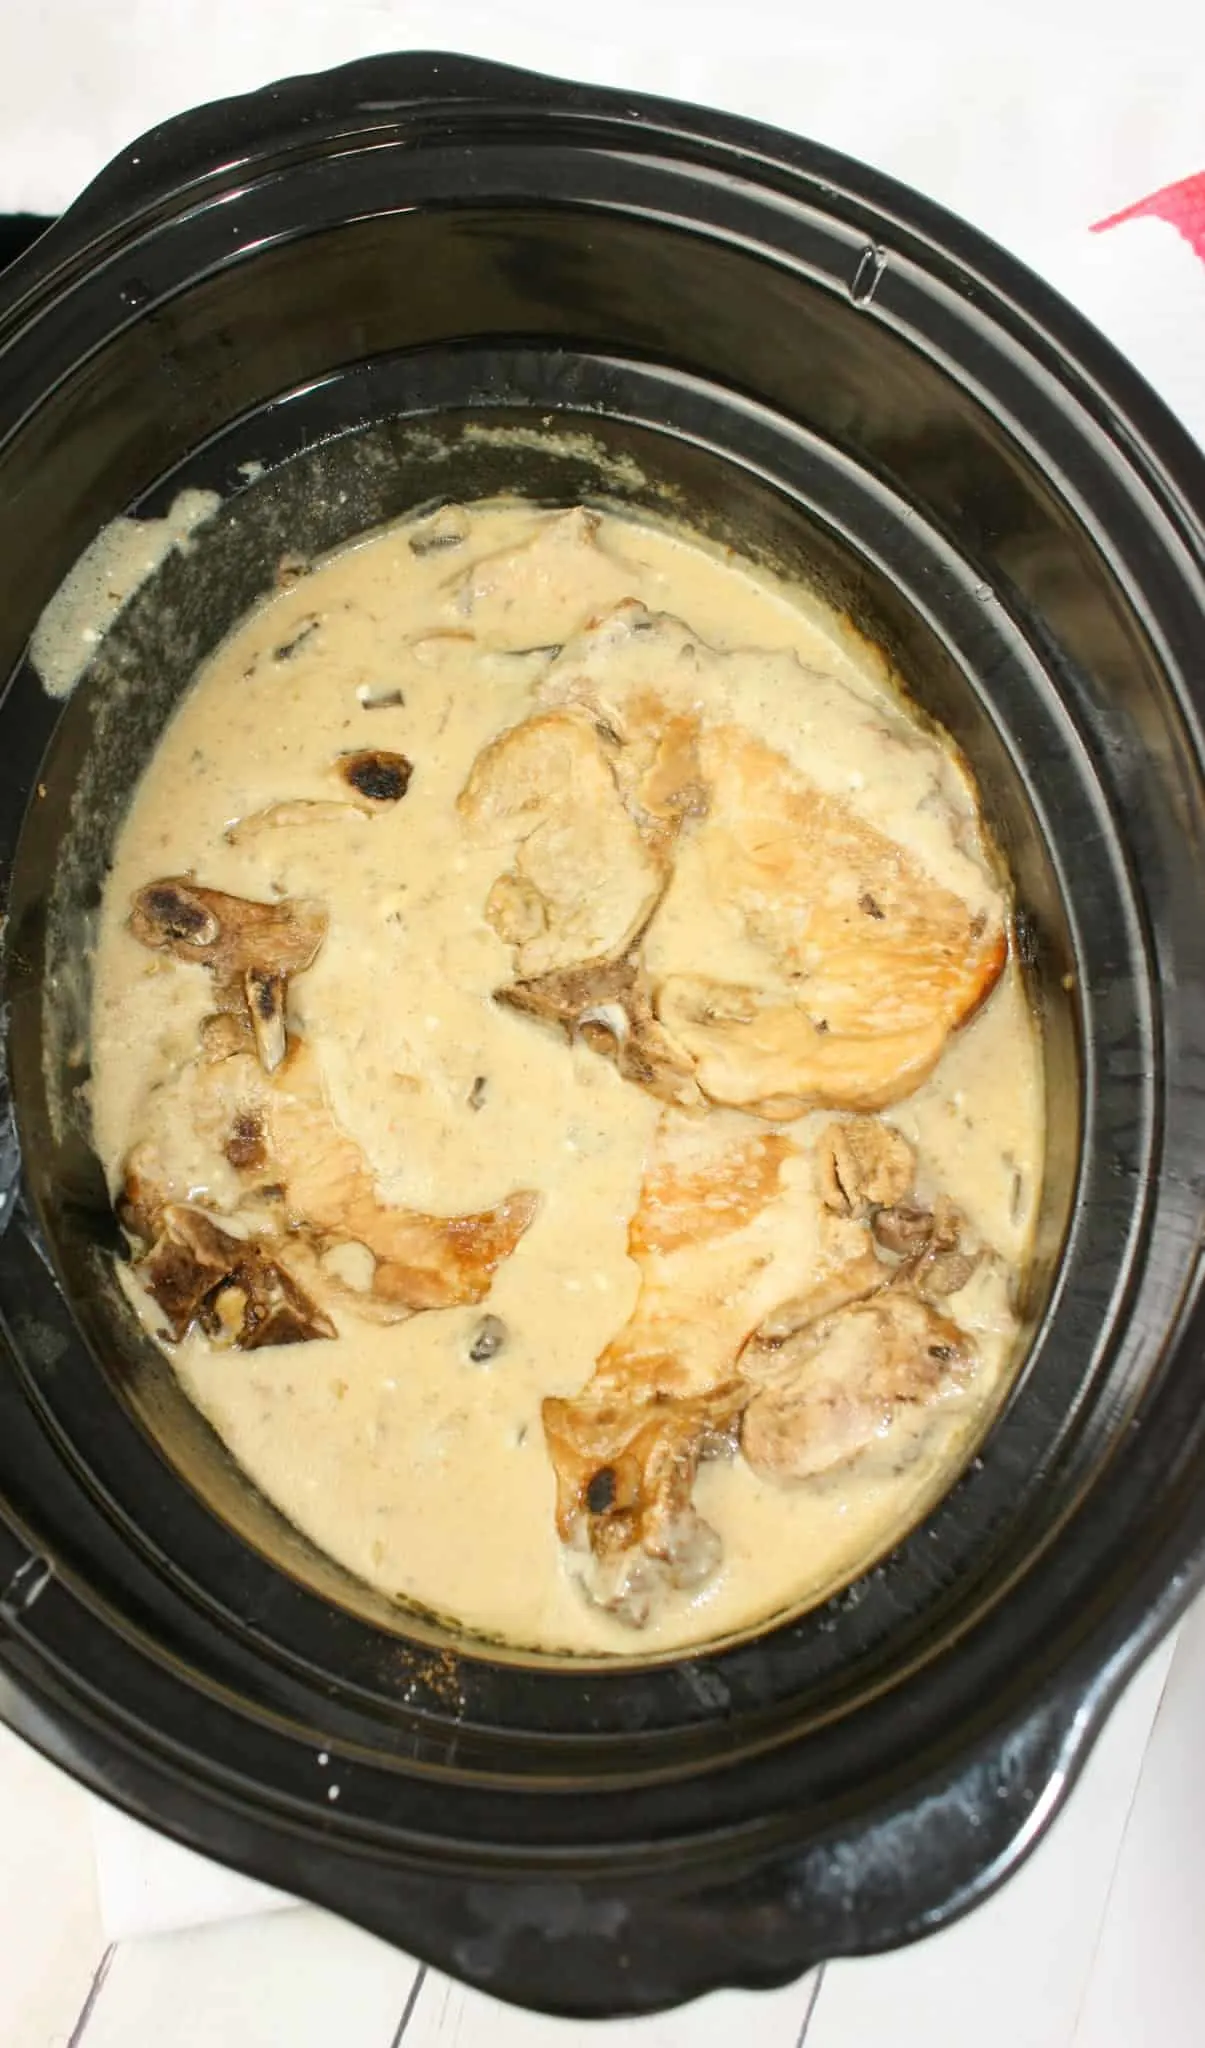 Crock Pot Pork Chops with Mushrooms is an easy slow cooker recipe for any time of the year.  Bone in pork chops smothered in a creamy mushroom gravy makes a wonderful comfort food main course.